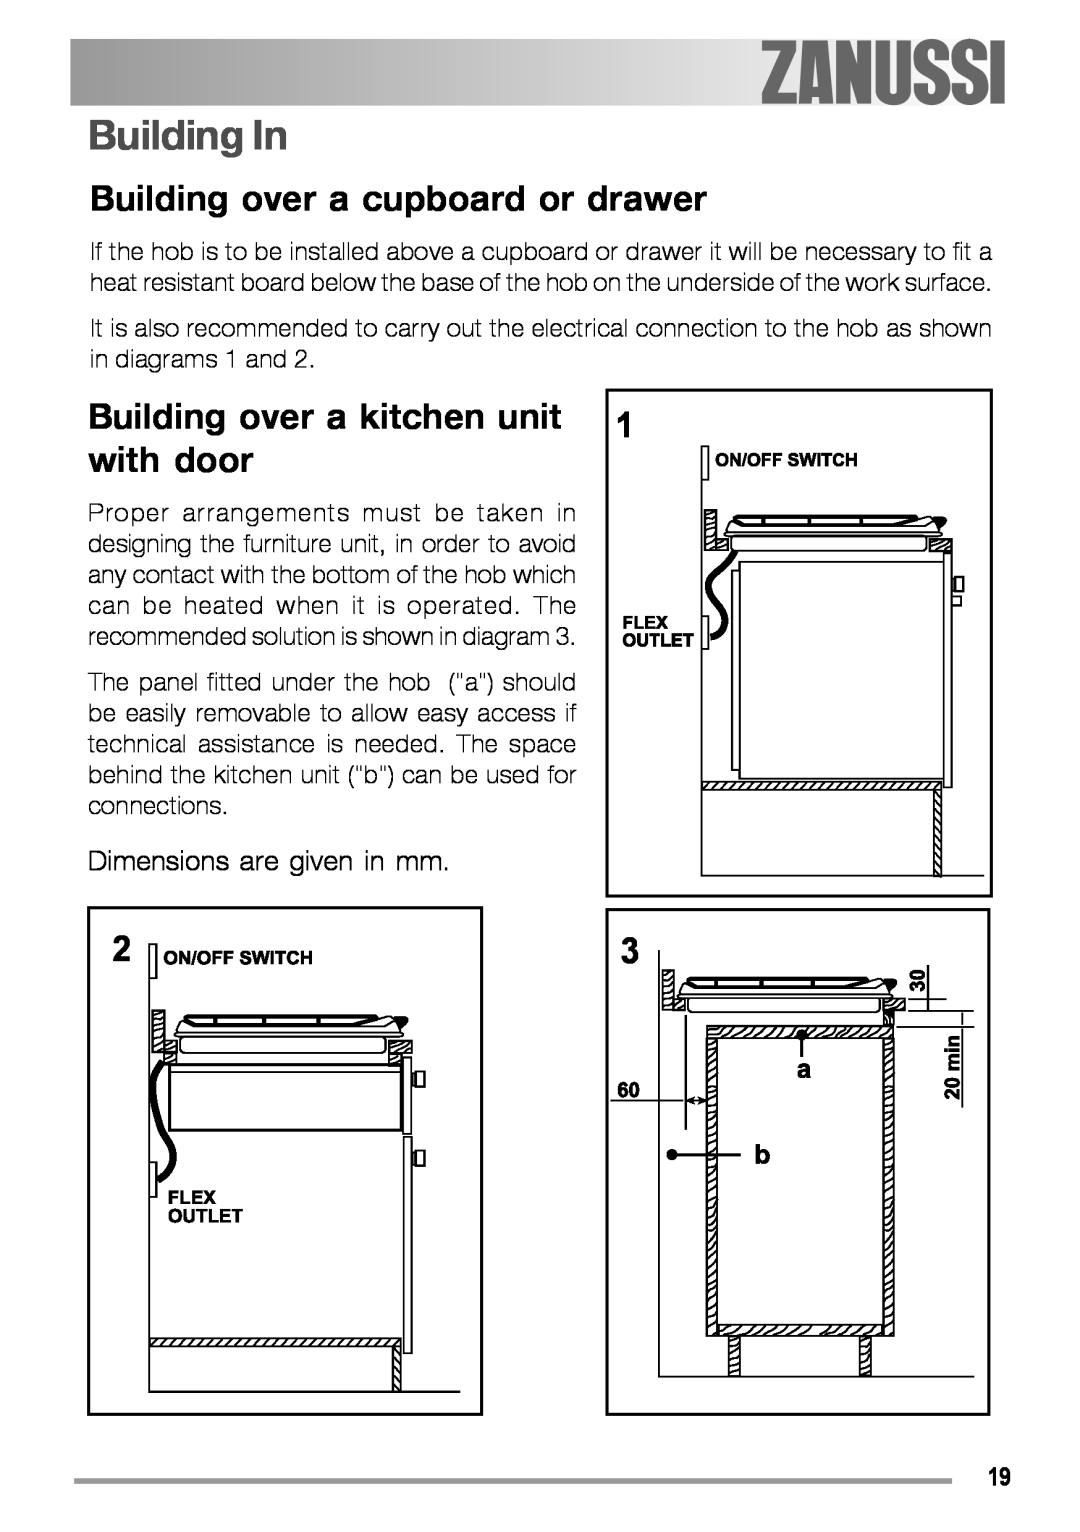 Zanussi ZGF 780 IT manual Building In, Building over a cupboard or drawer, Building over a kitchen unit with door 